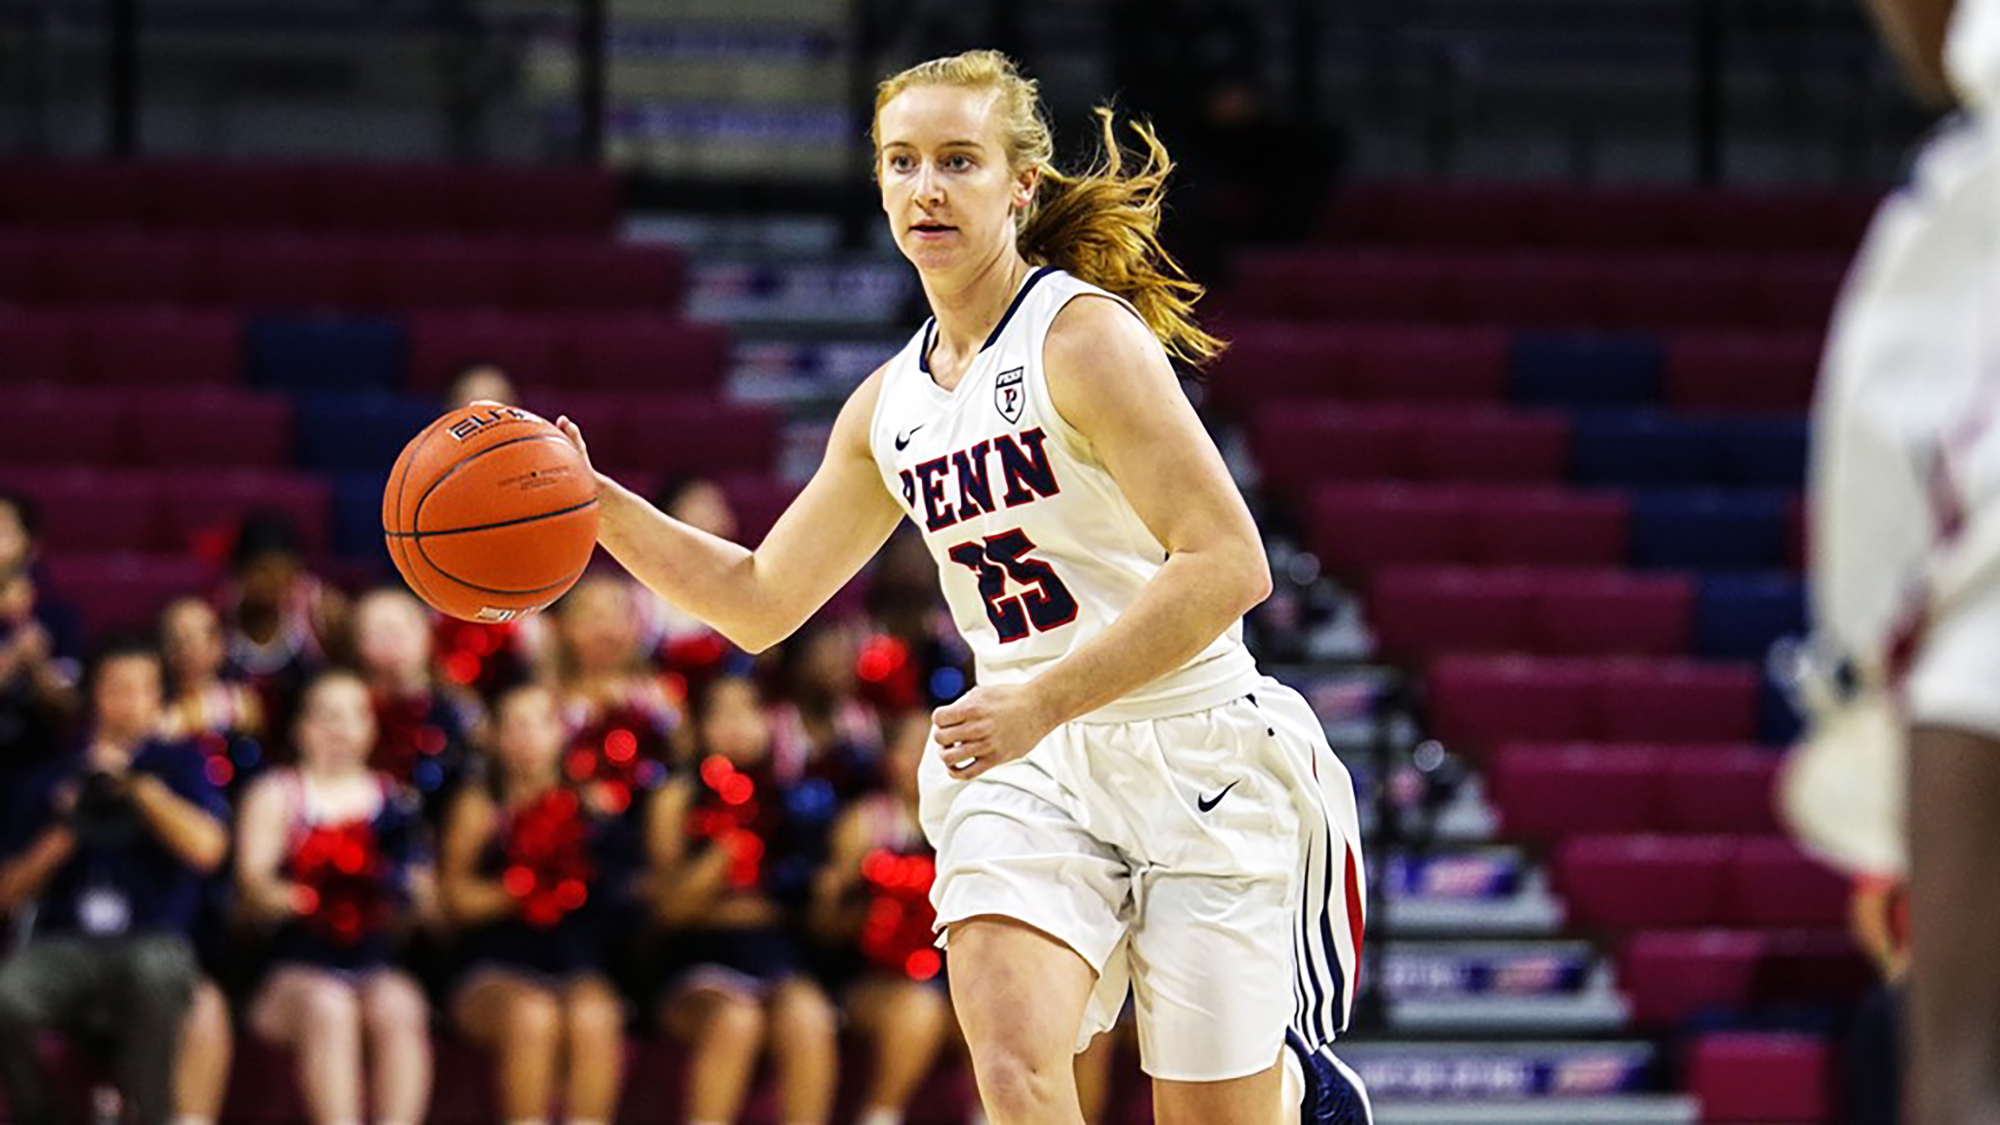 Ashley Russell pushes the ball during a game at the Palestra.